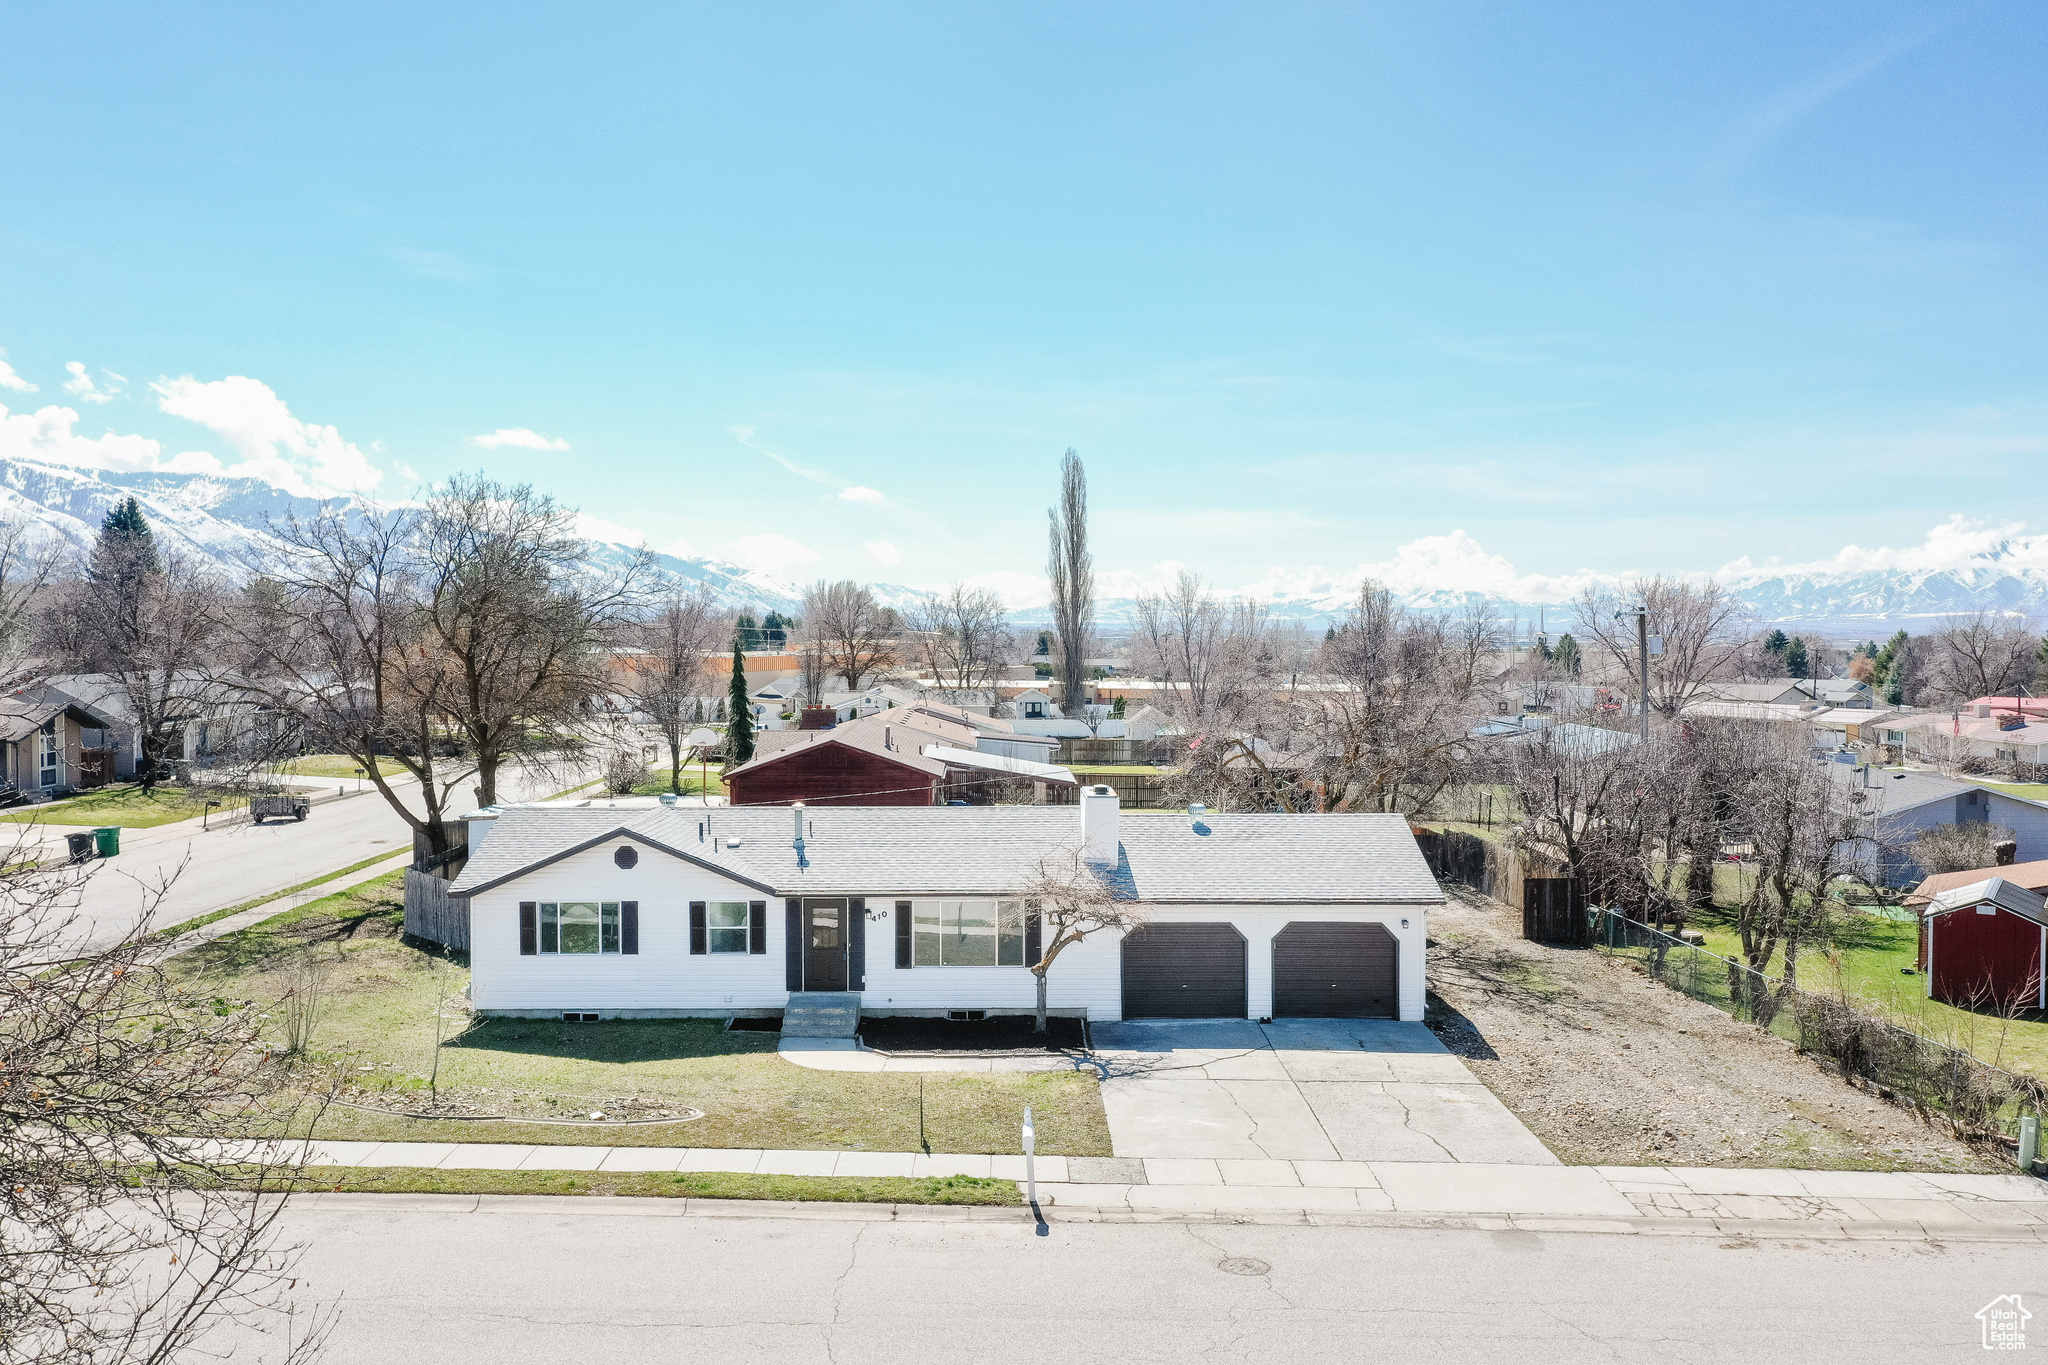 410 E 120 S, Smithfield, Utah 84335, 4 Bedrooms Bedrooms, 12 Rooms Rooms,1 BathroomBathrooms,Residential,For sale,120,1988374